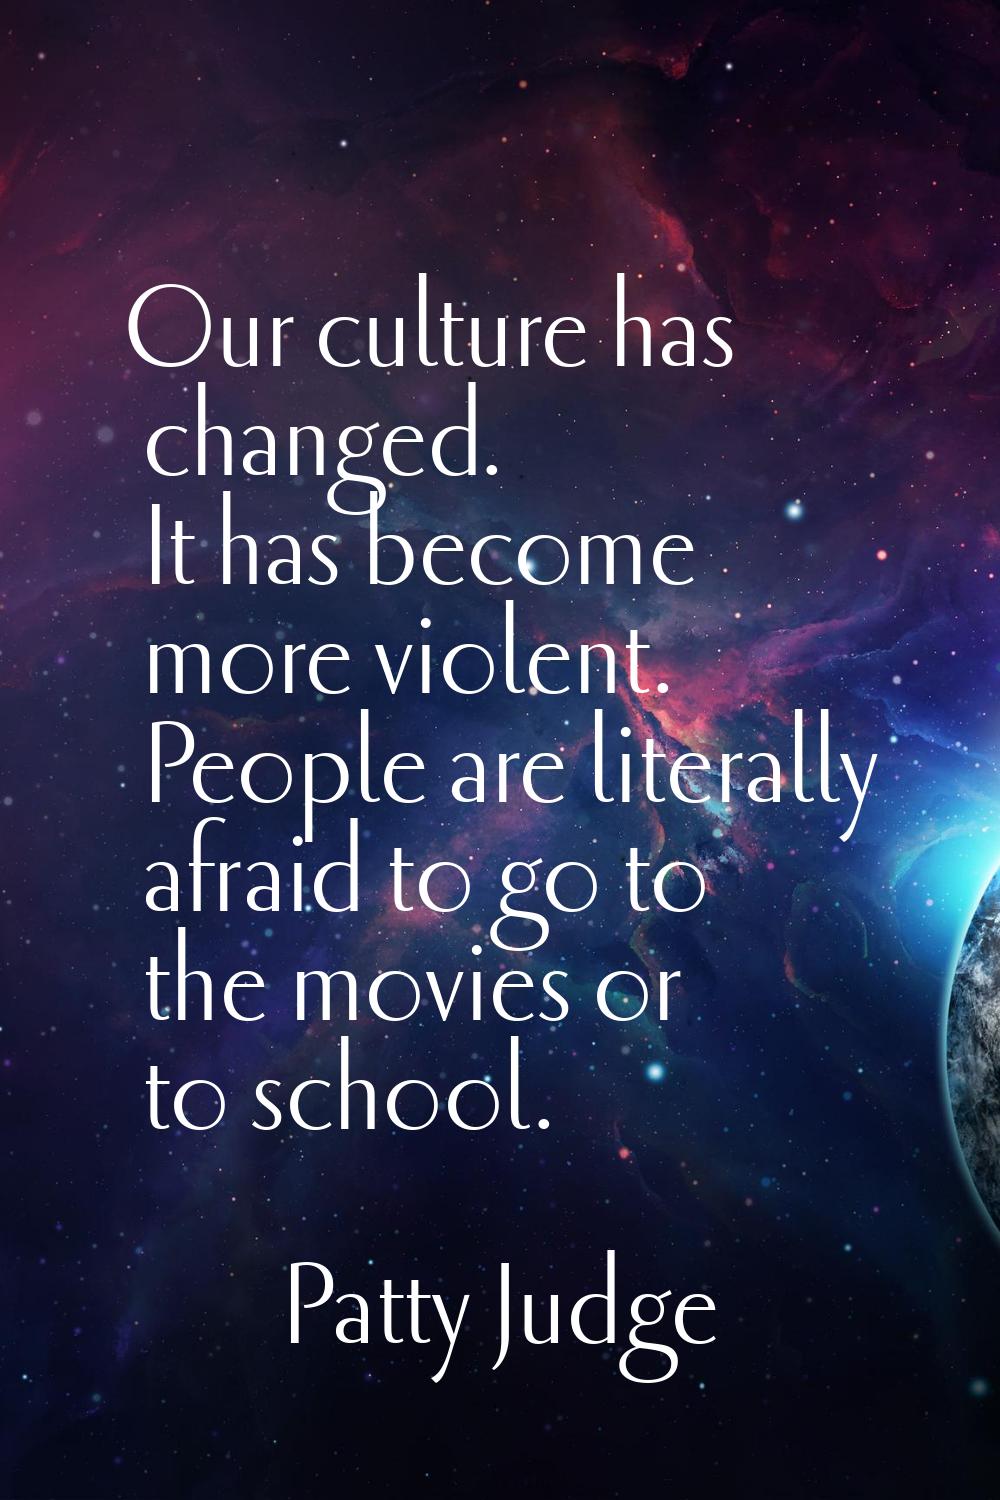 Our culture has changed. It has become more violent. People are literally afraid to go to the movie